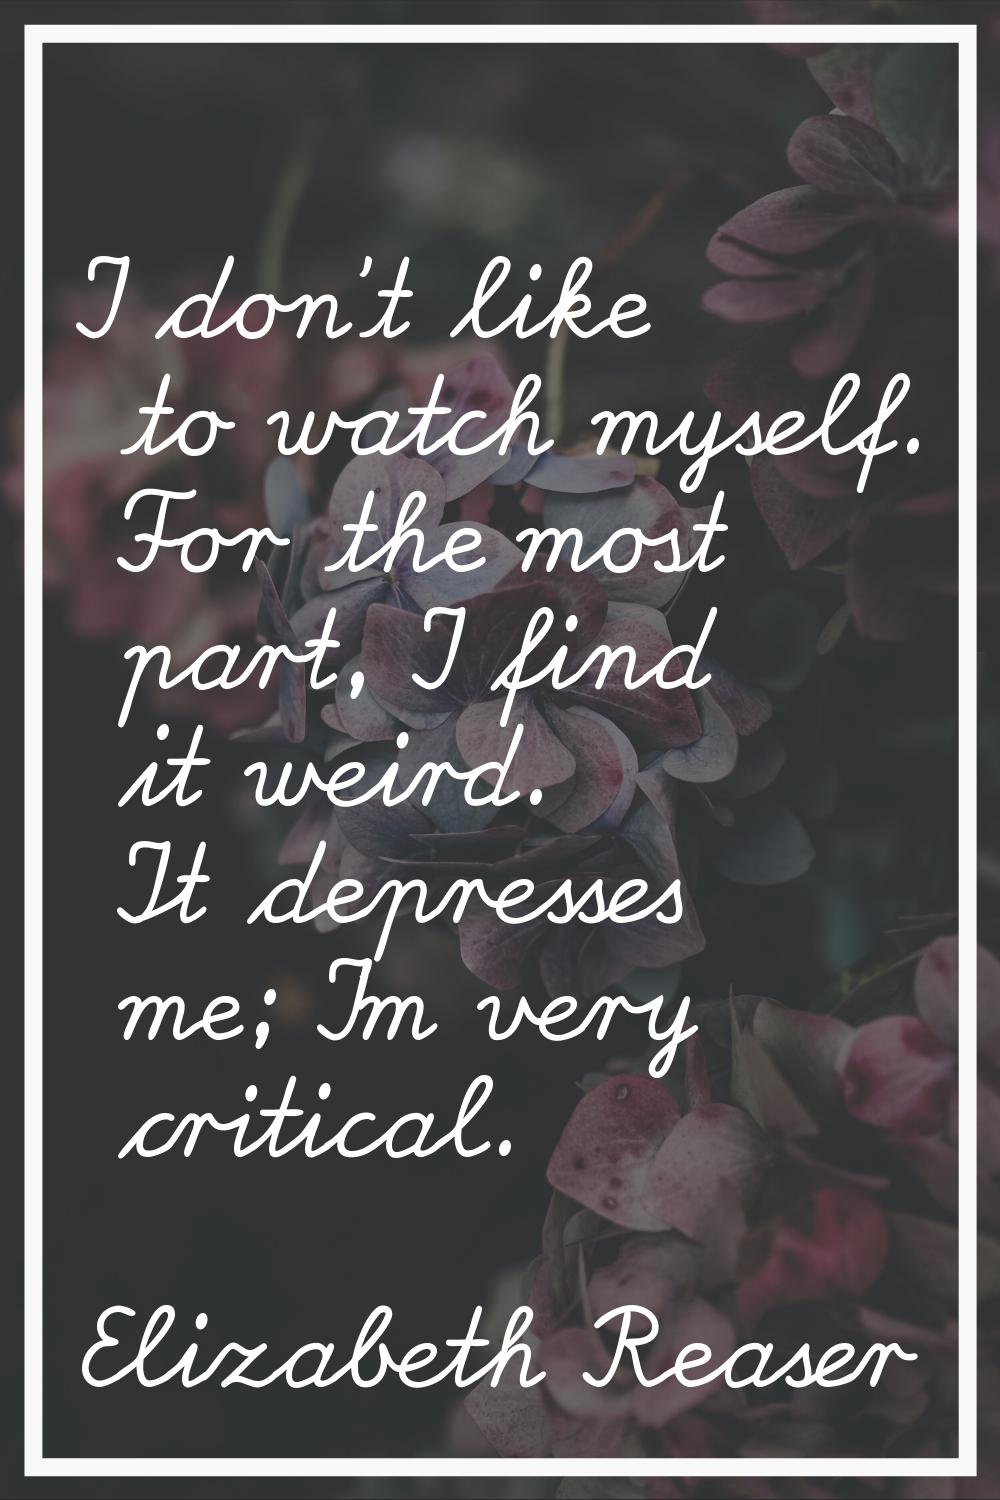 I don't like to watch myself. For the most part, I find it weird. It depresses me; I'm very critica